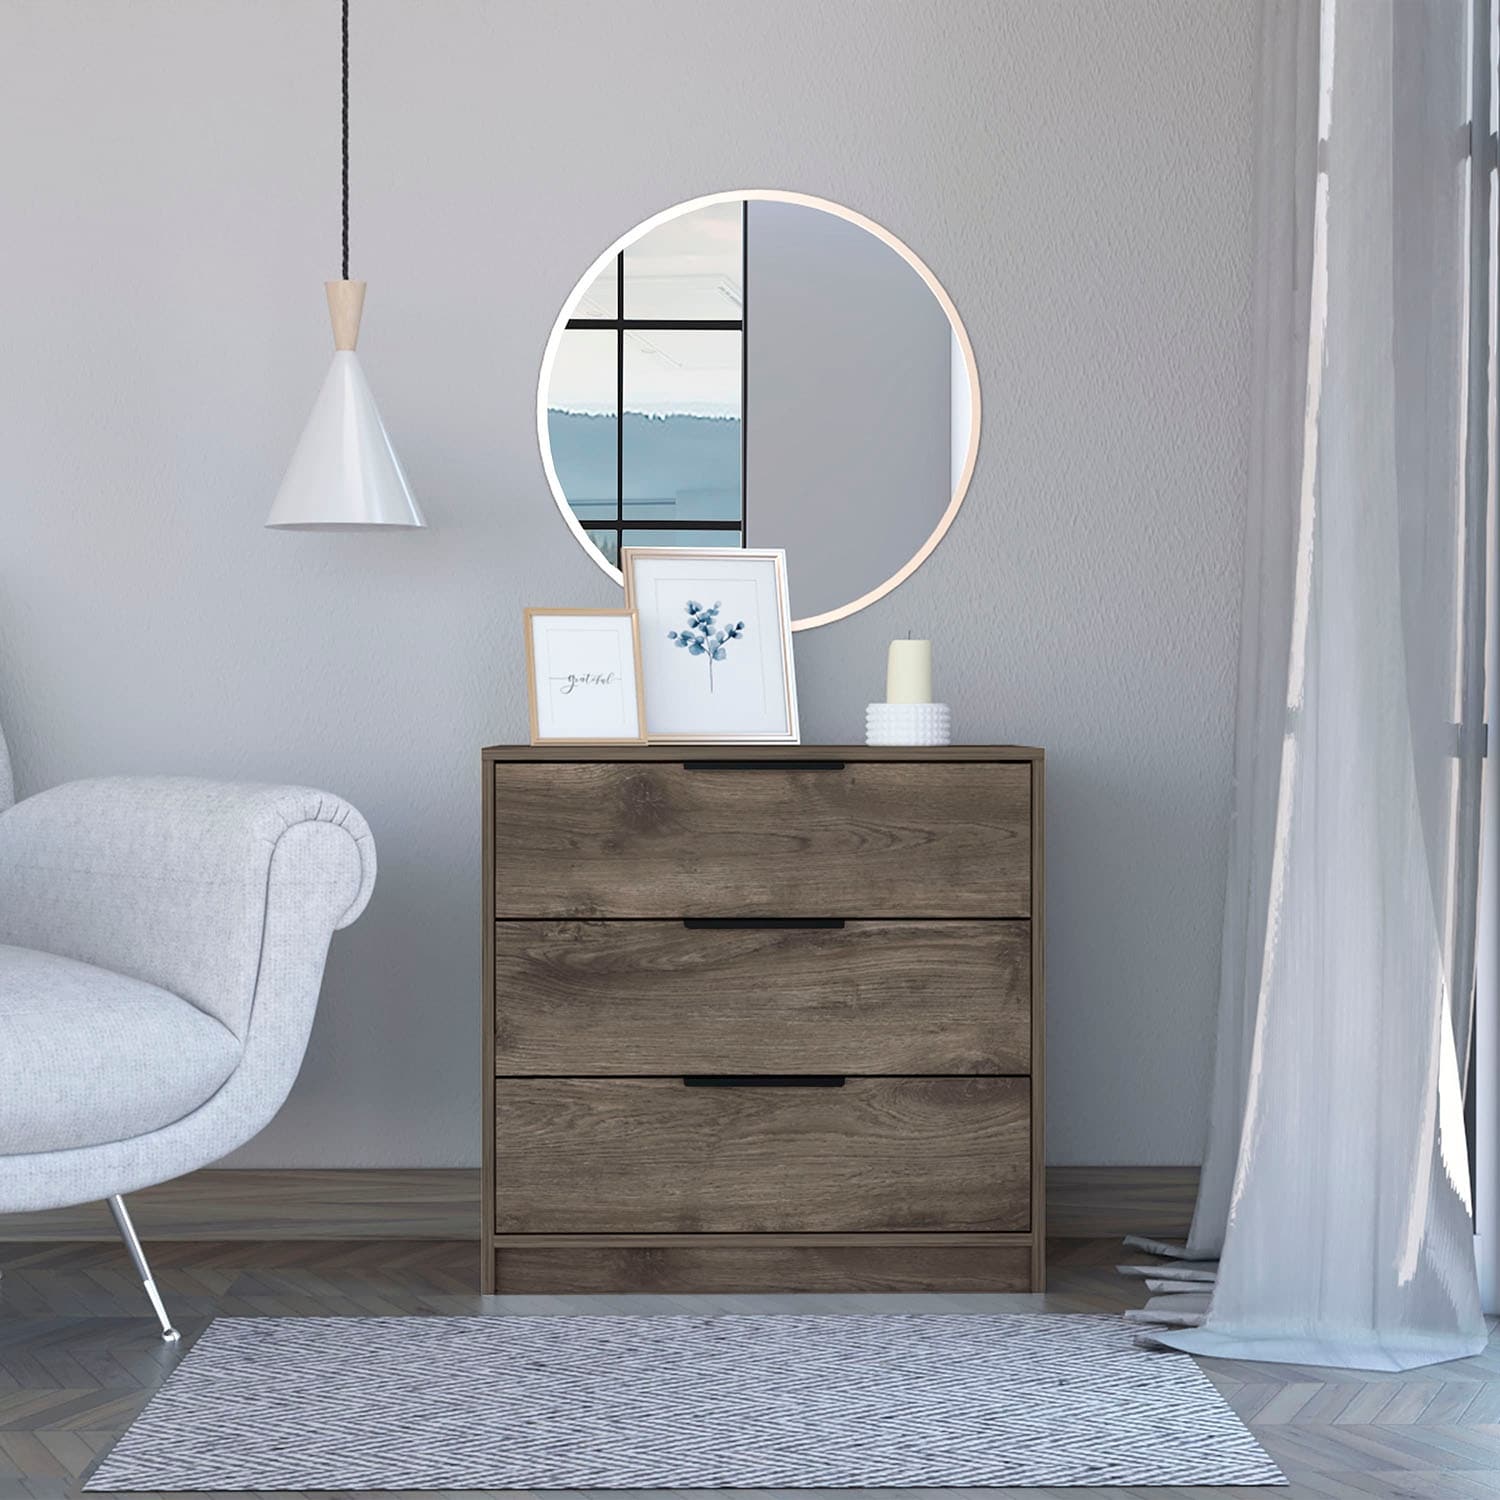 https://ak1.ostkcdn.com/images/products/is/images/direct/4a8cc05ba23ca920d000d6a05324db9a91392aef/Multifunctional-Simple-Design-Dressing-Table-with-3-Drawers.jpg